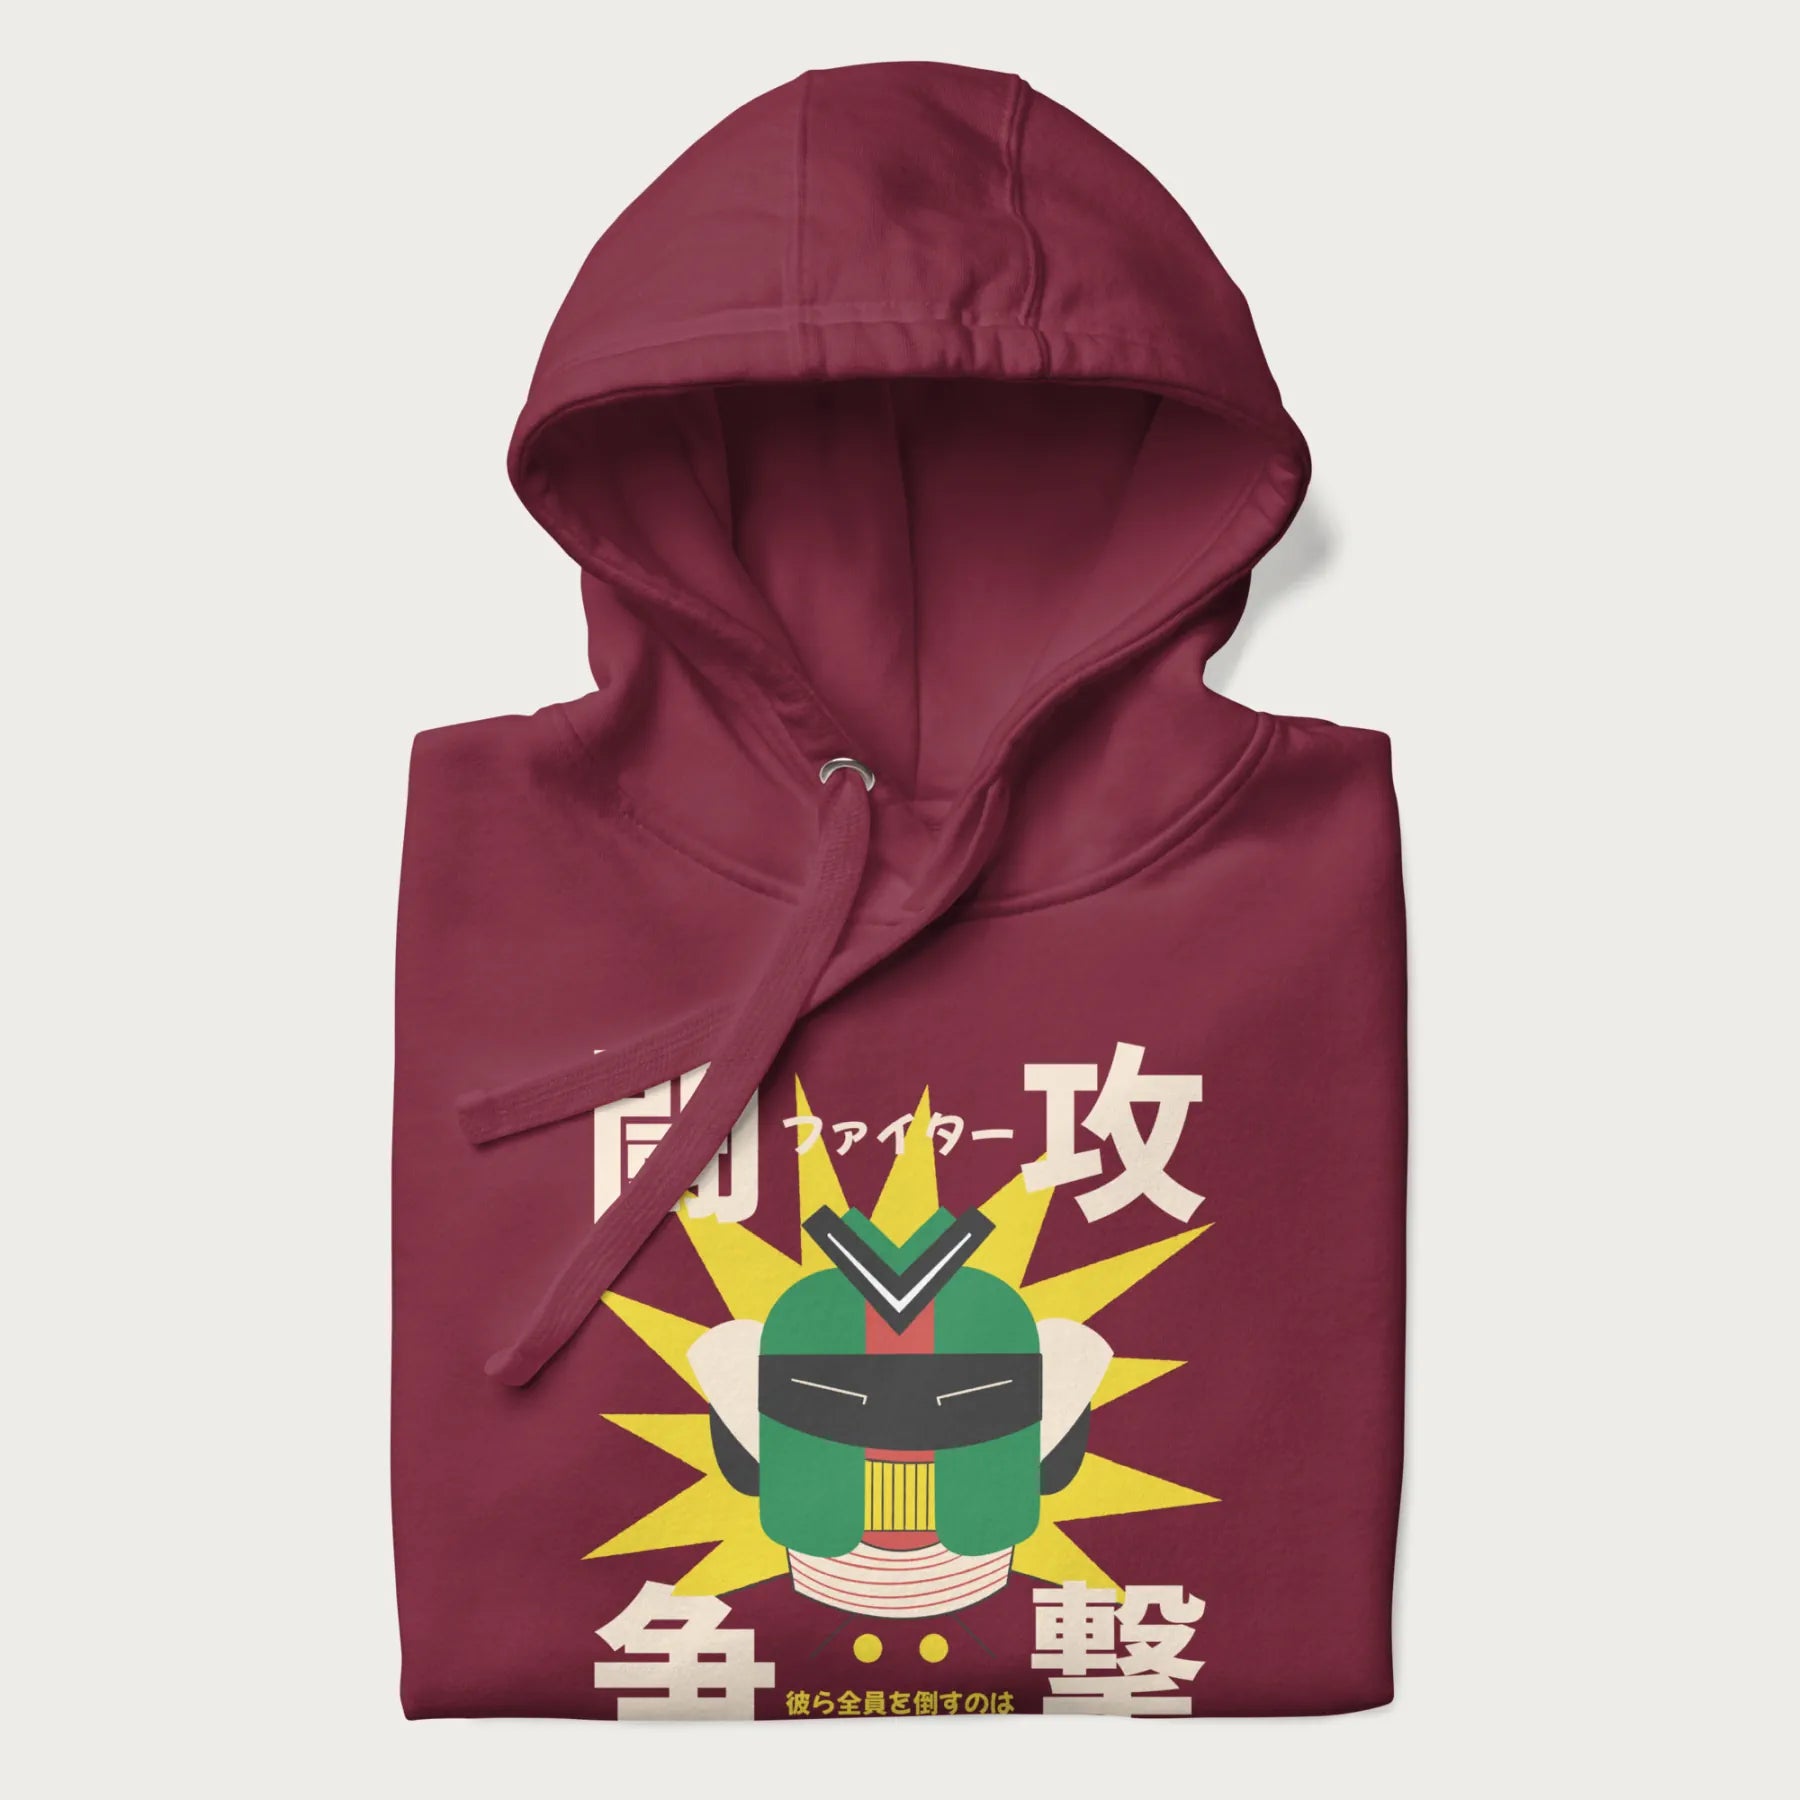 Folded maroon hoodie with retro graphic of a mecha warrior and Japanese text for "Fight," "Attack," "Conflict," and "Destiny to defeat them all".